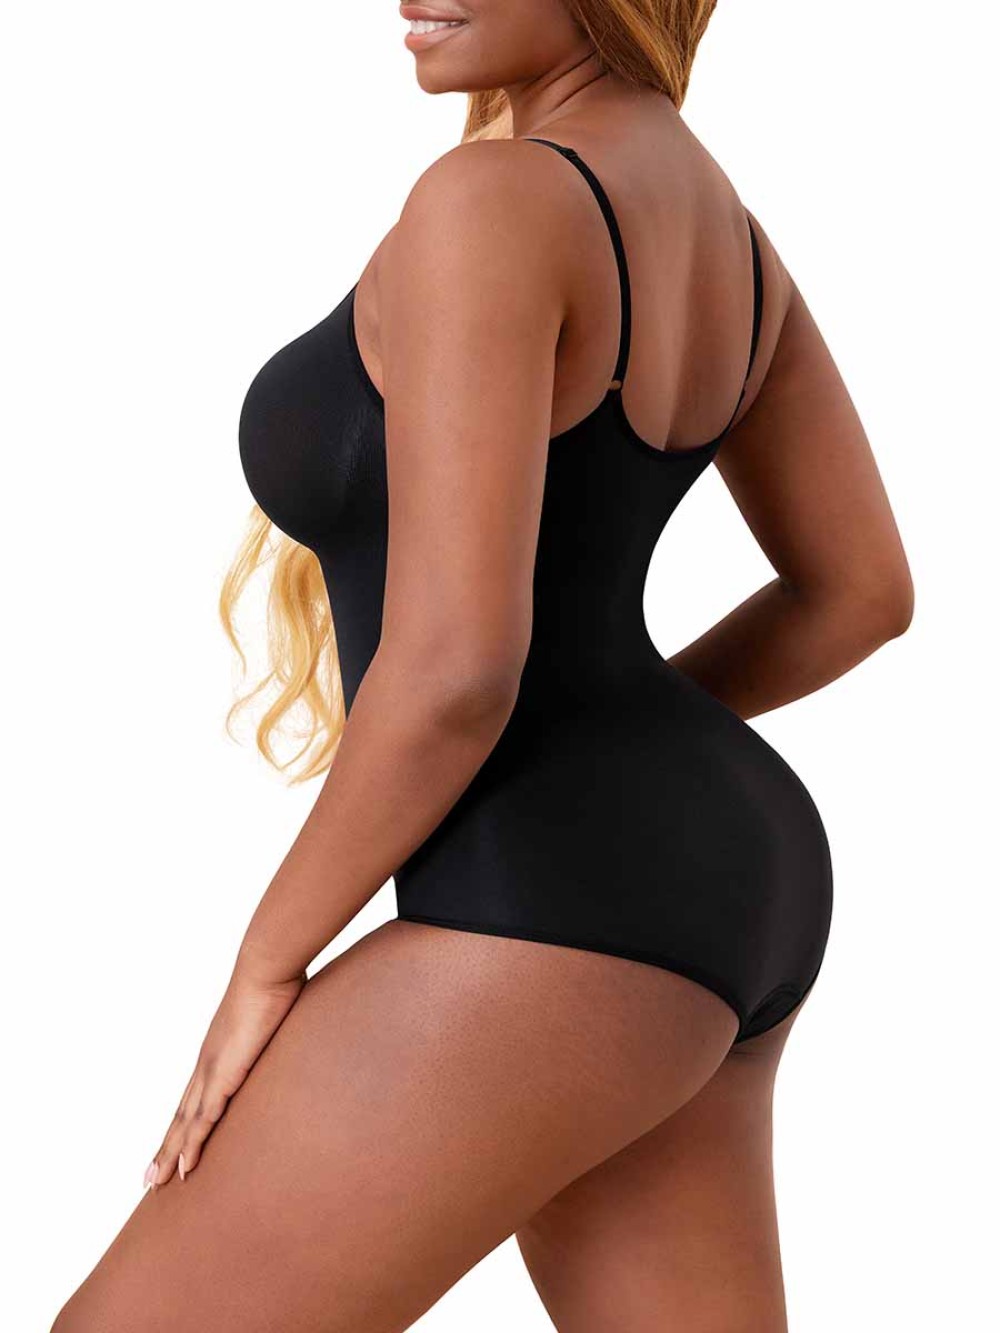 New Arrival Plus Size Seamless Body Shaper